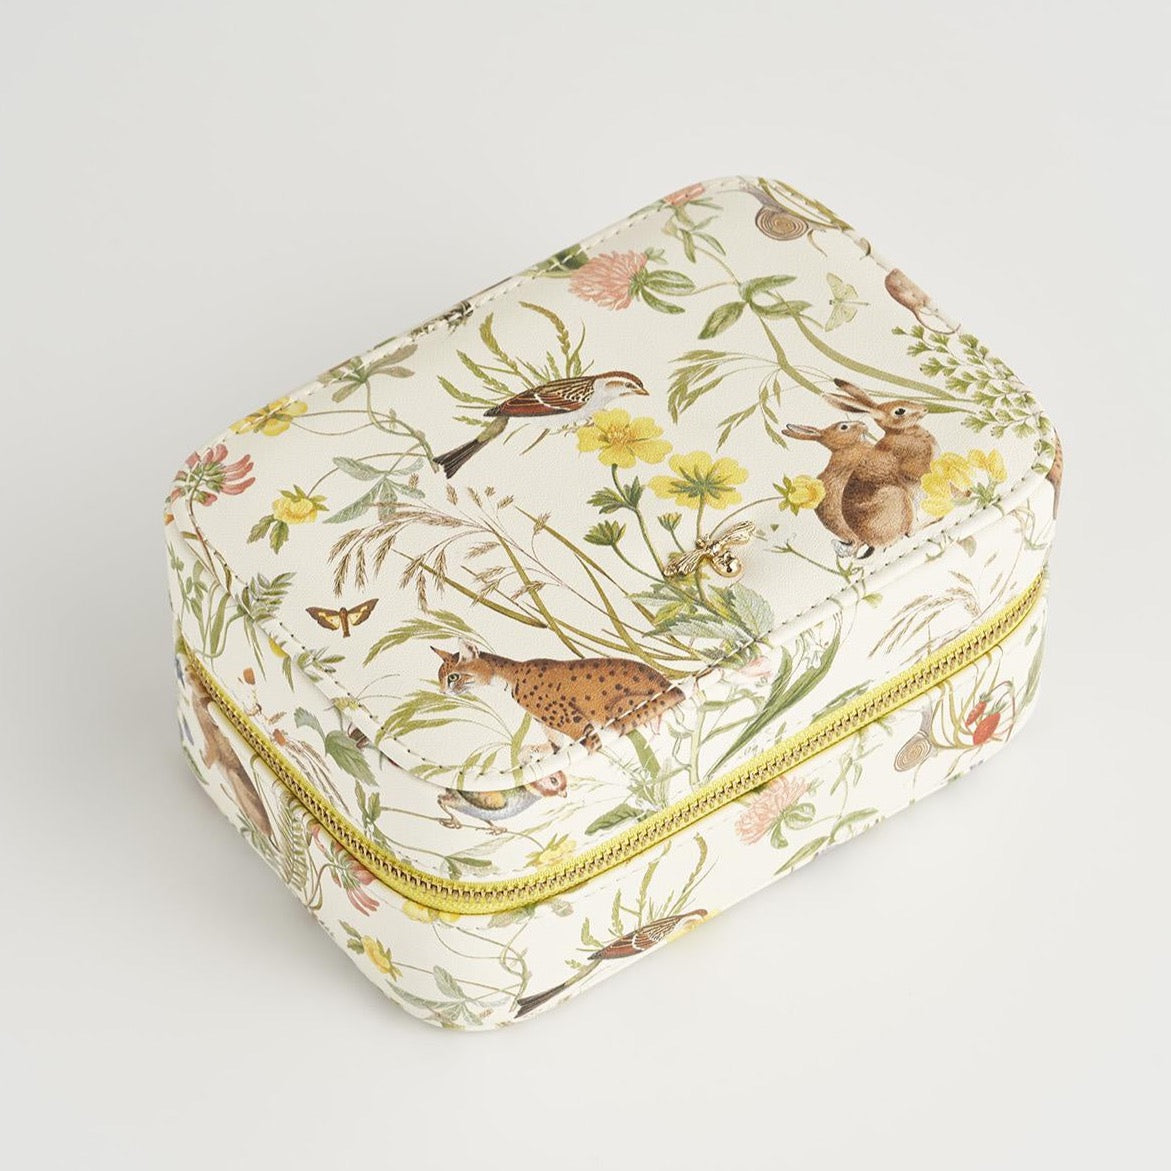 Meadow Creatures Large Jewellery Box - Marshmallow Yellow